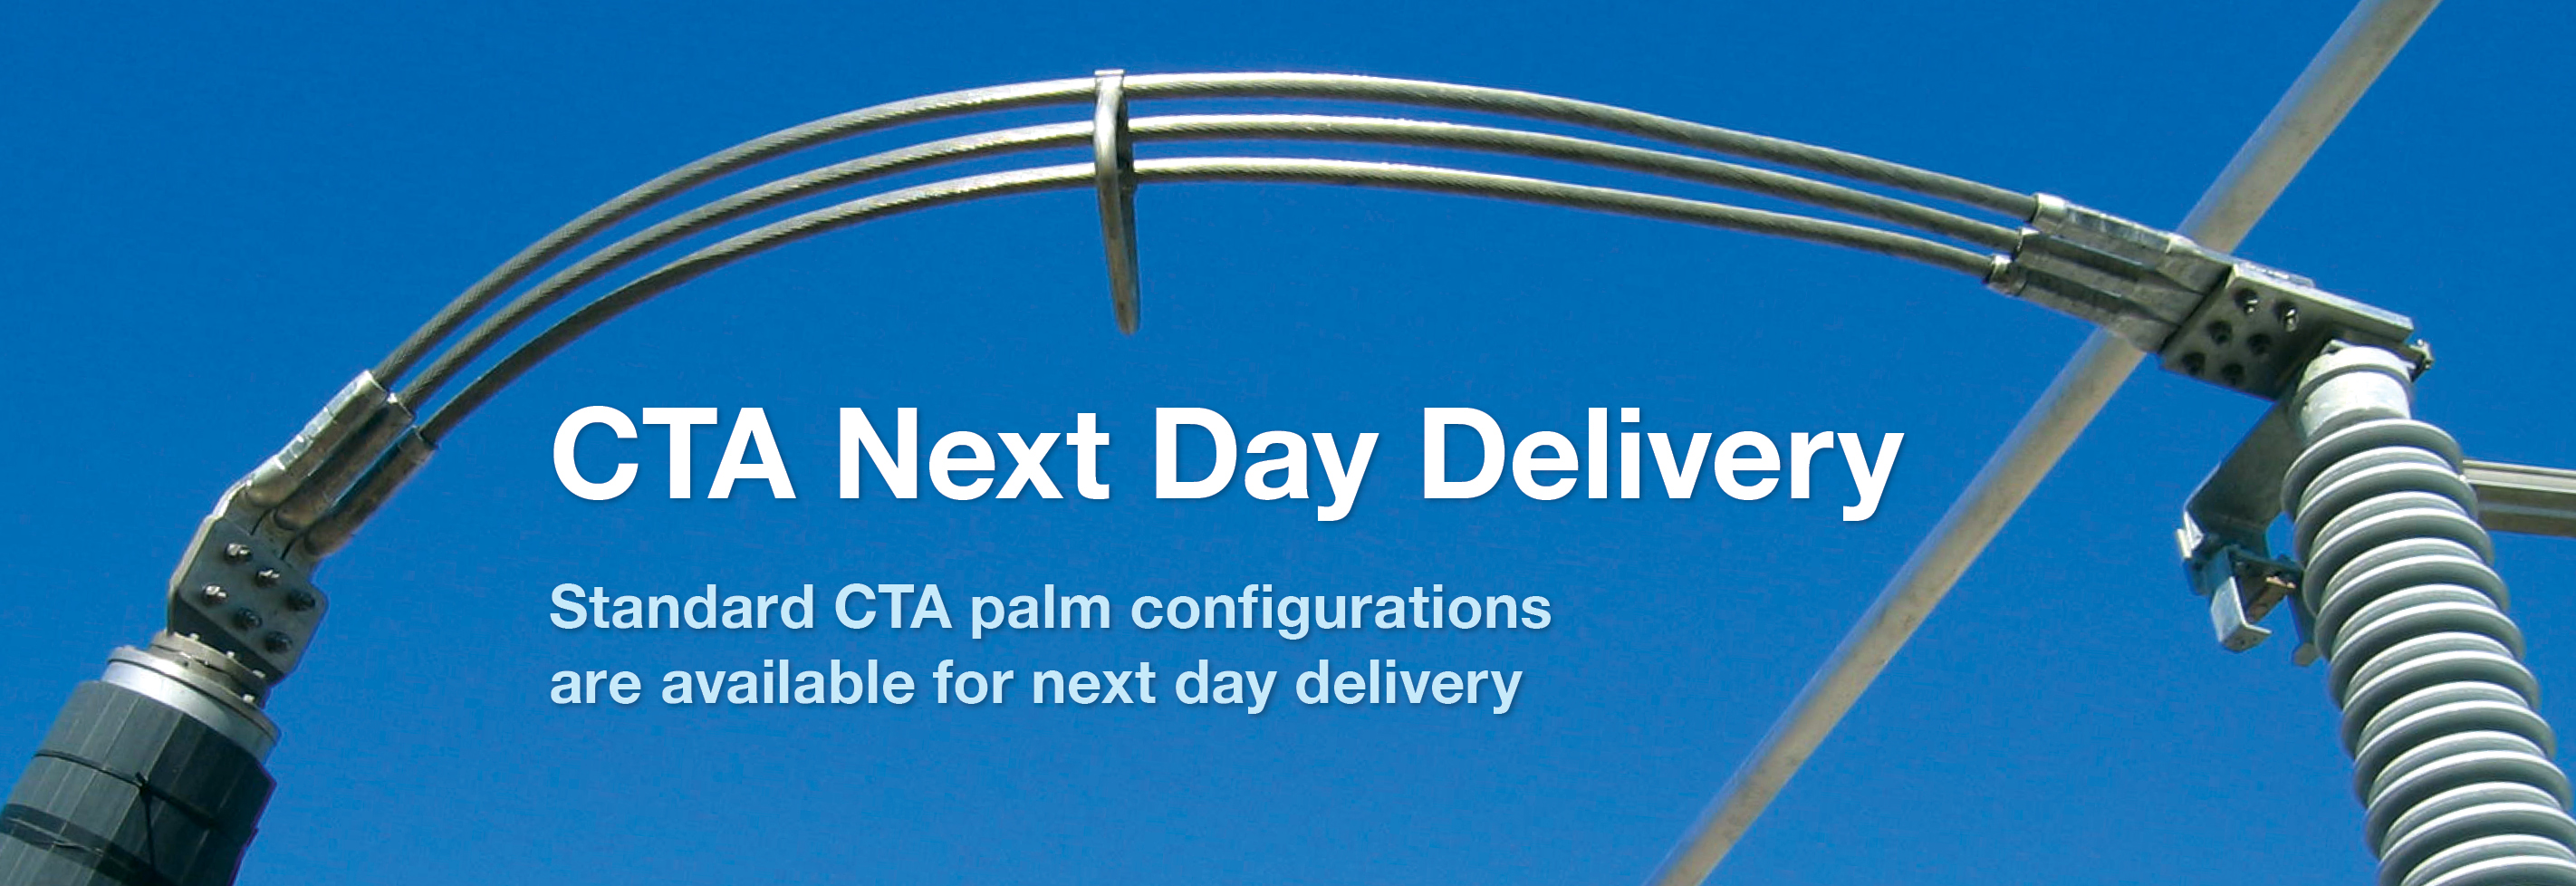 CTA Next Day Delivery